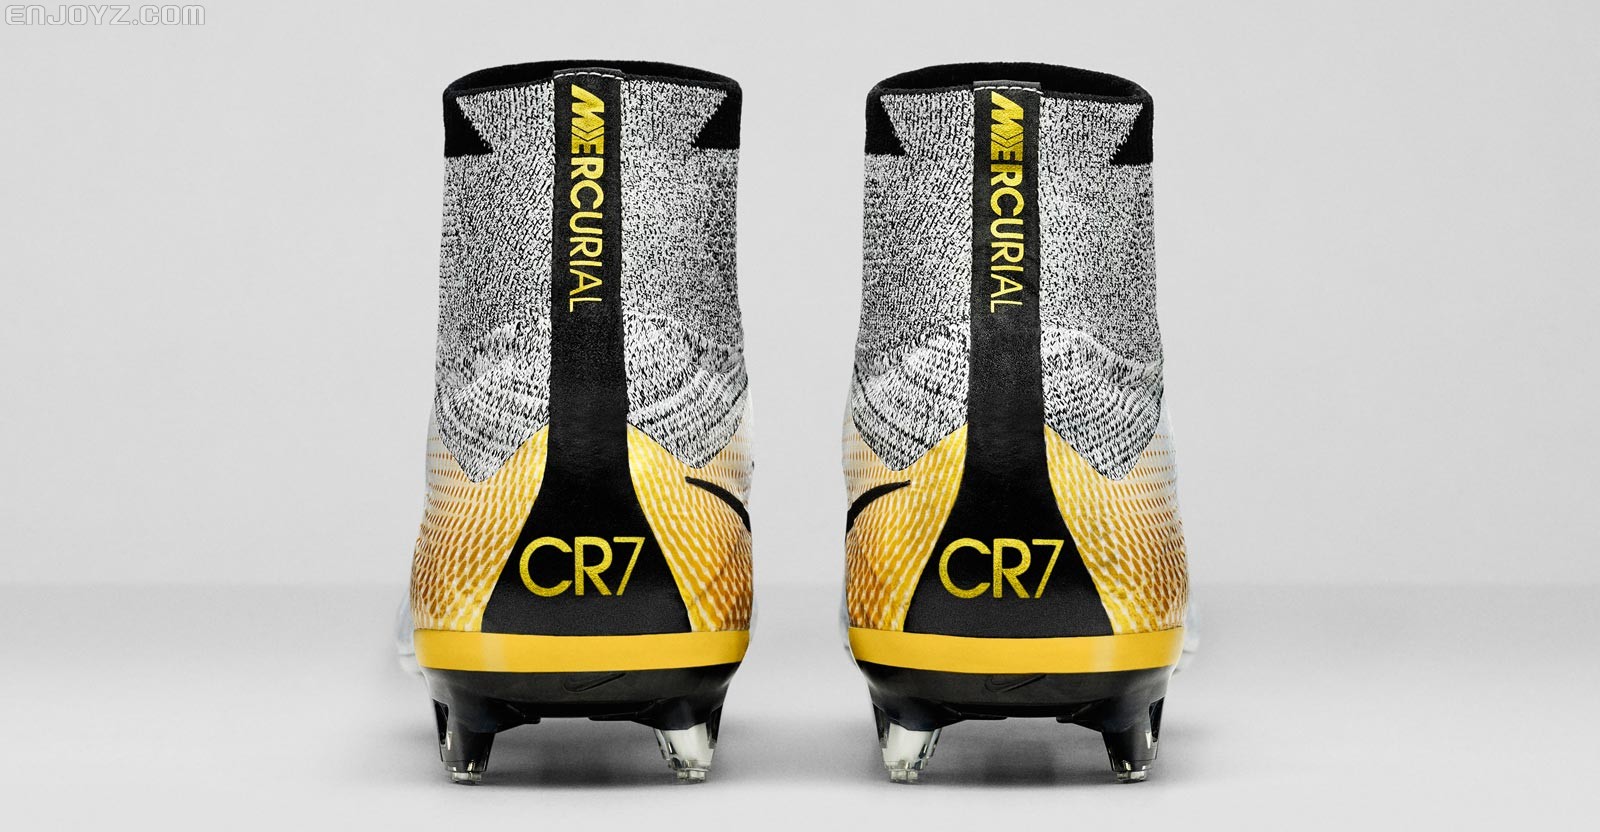 nike-mercurial-superfly-cr7-324k-gold-boots-7.jpg